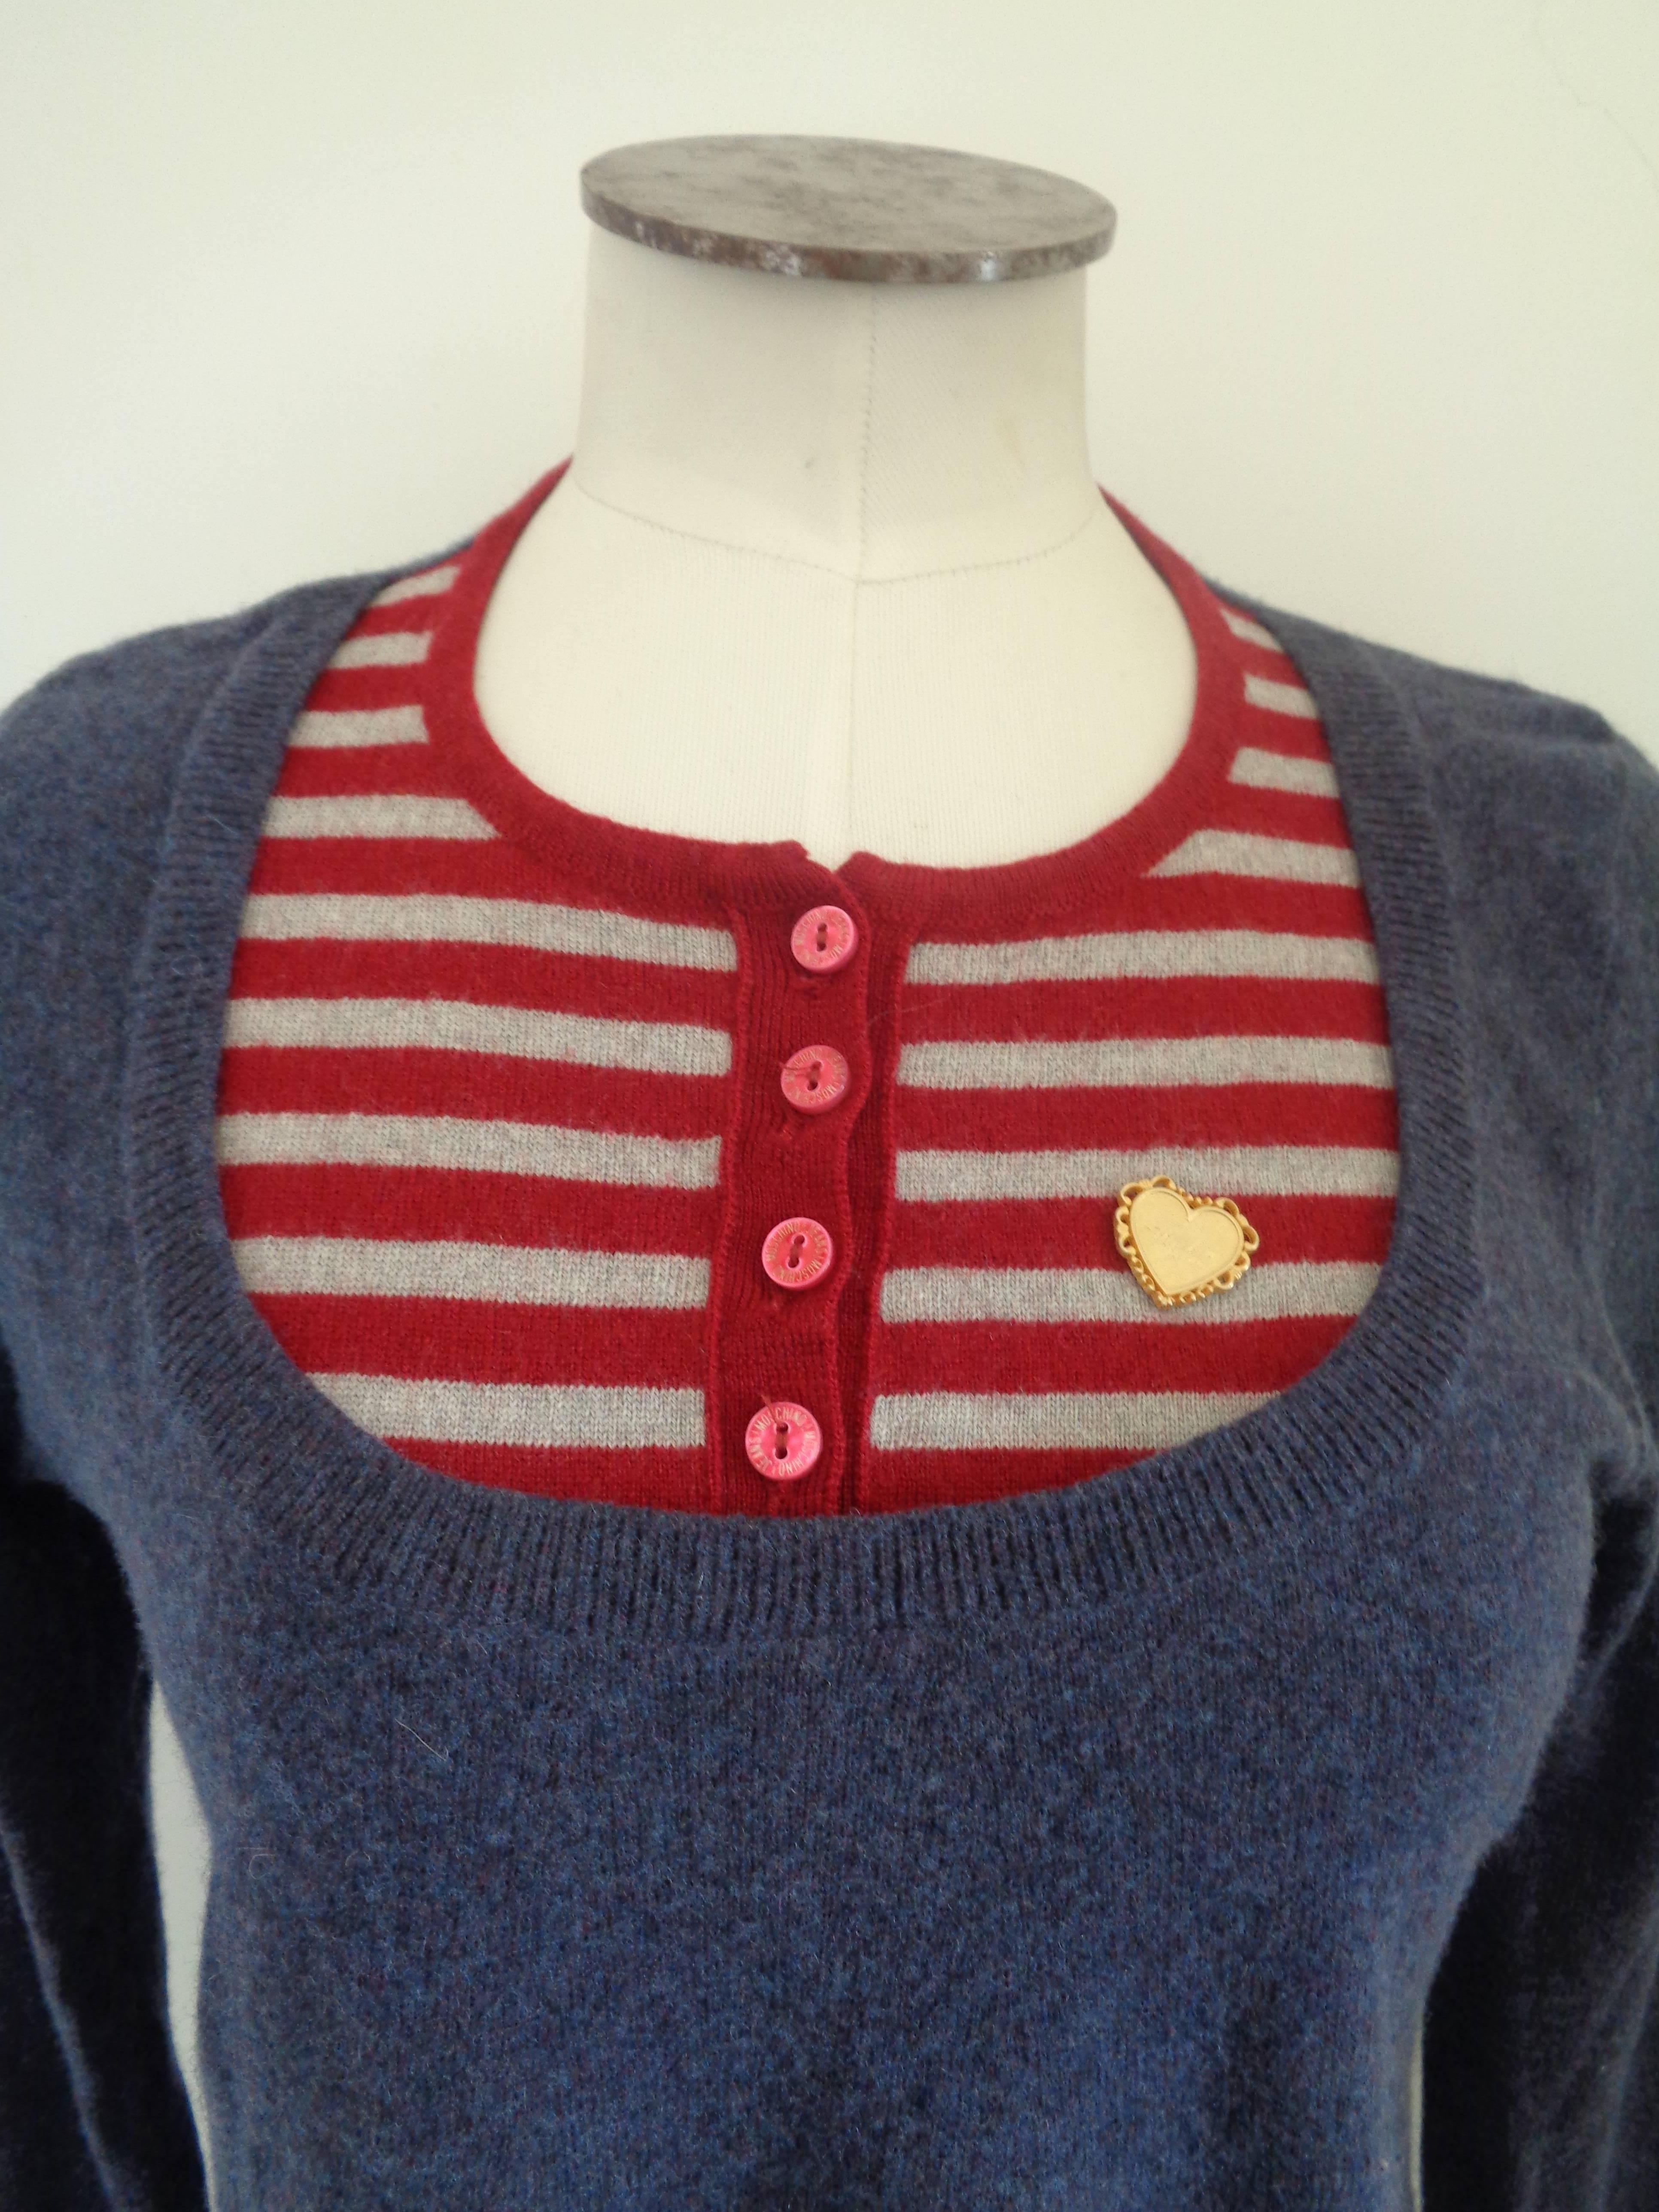 Moschino Wool Blu White and Red Stripes Shirt

embellished with an heart on the top
Totally made in italy in size 42